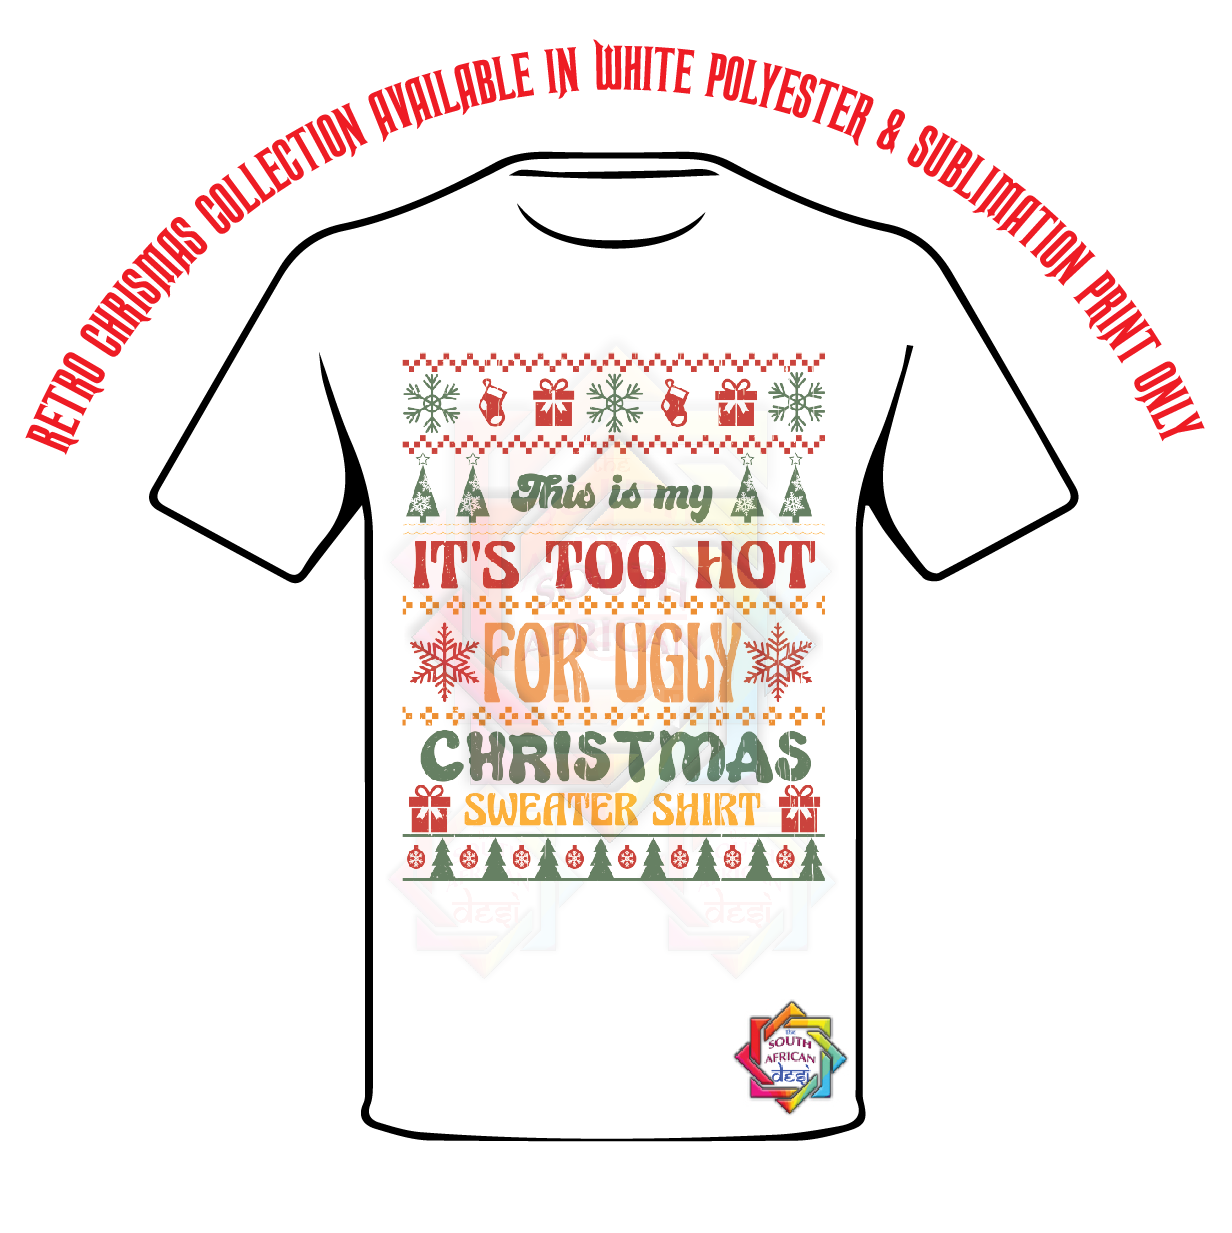 THIS IS MY IT'S TOO HOT FOR UGLY CHRITMAS SWEATER T-SHIRT • RETRO XMAS LOOK